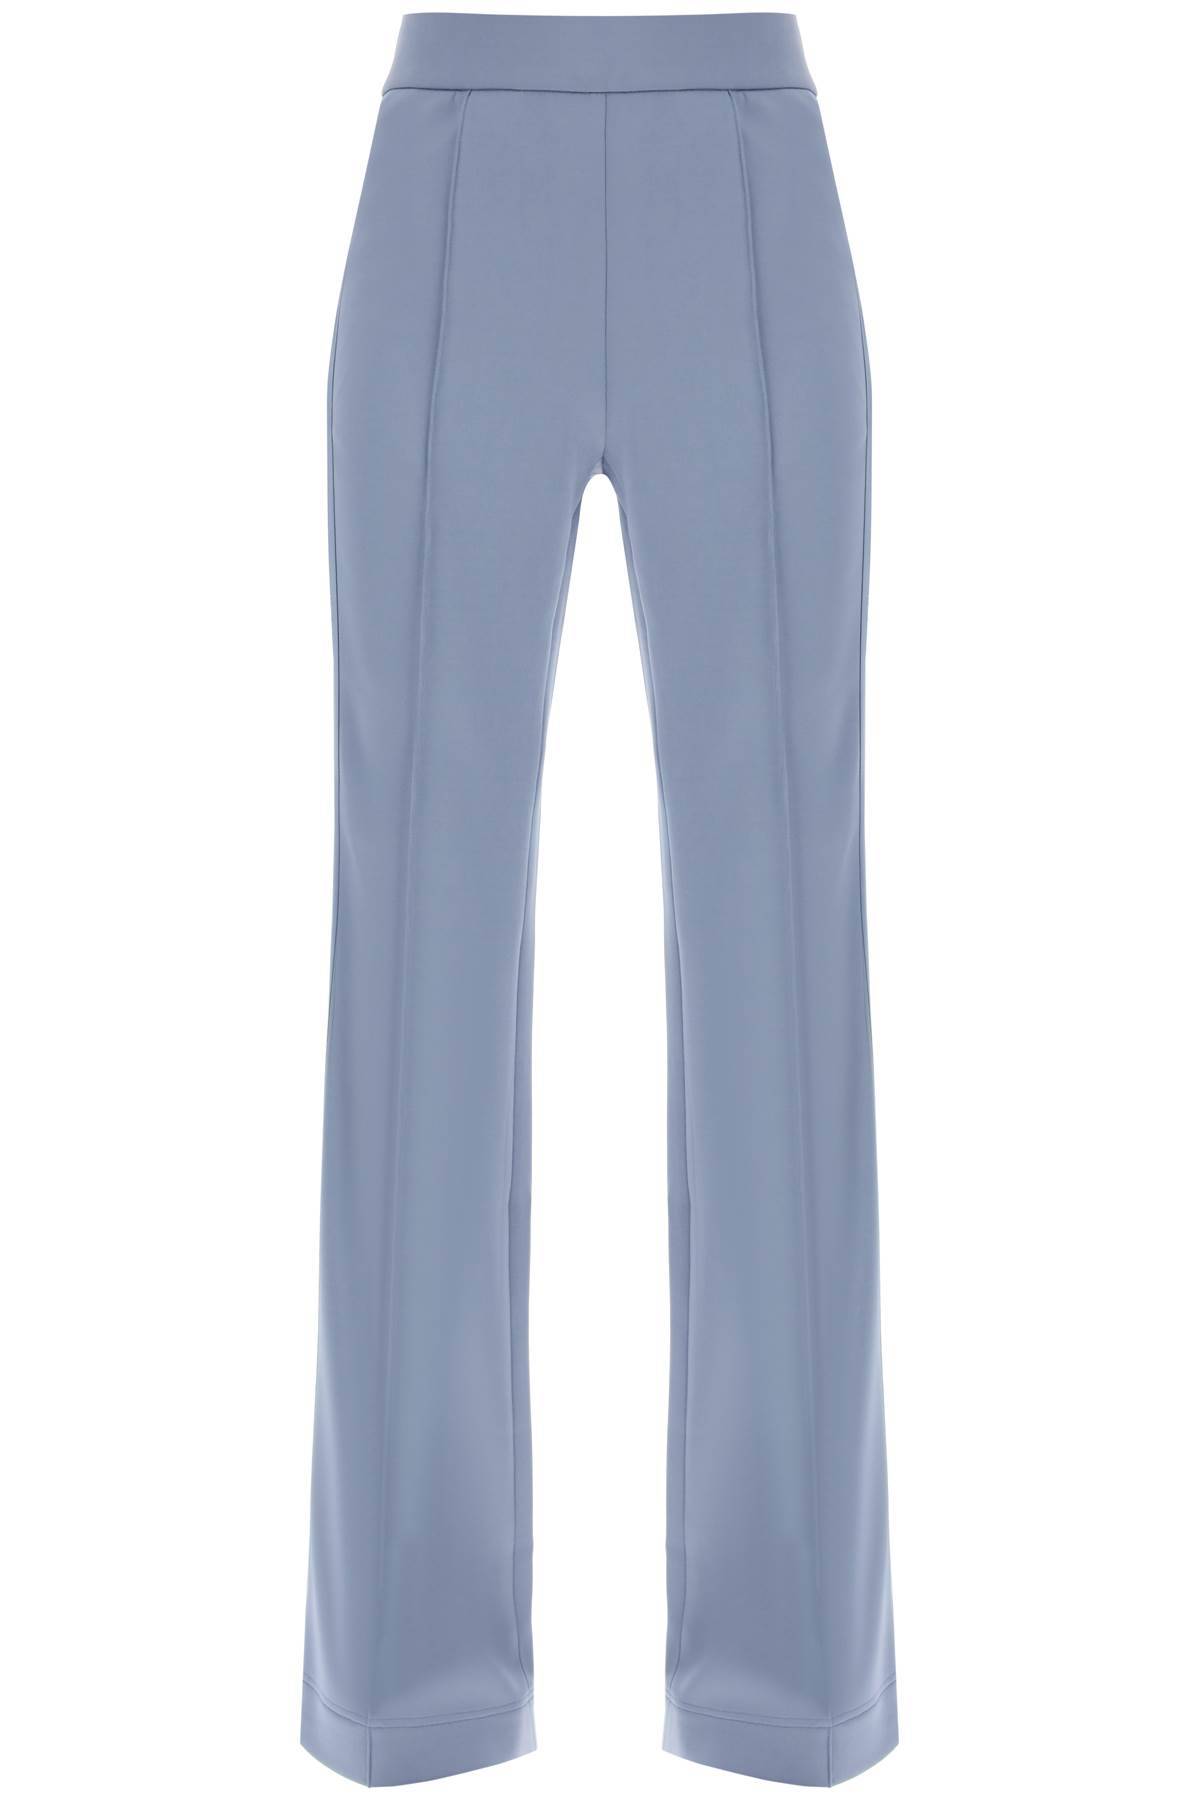 Fendi Flared Pants With Logo Tape In Light Blue